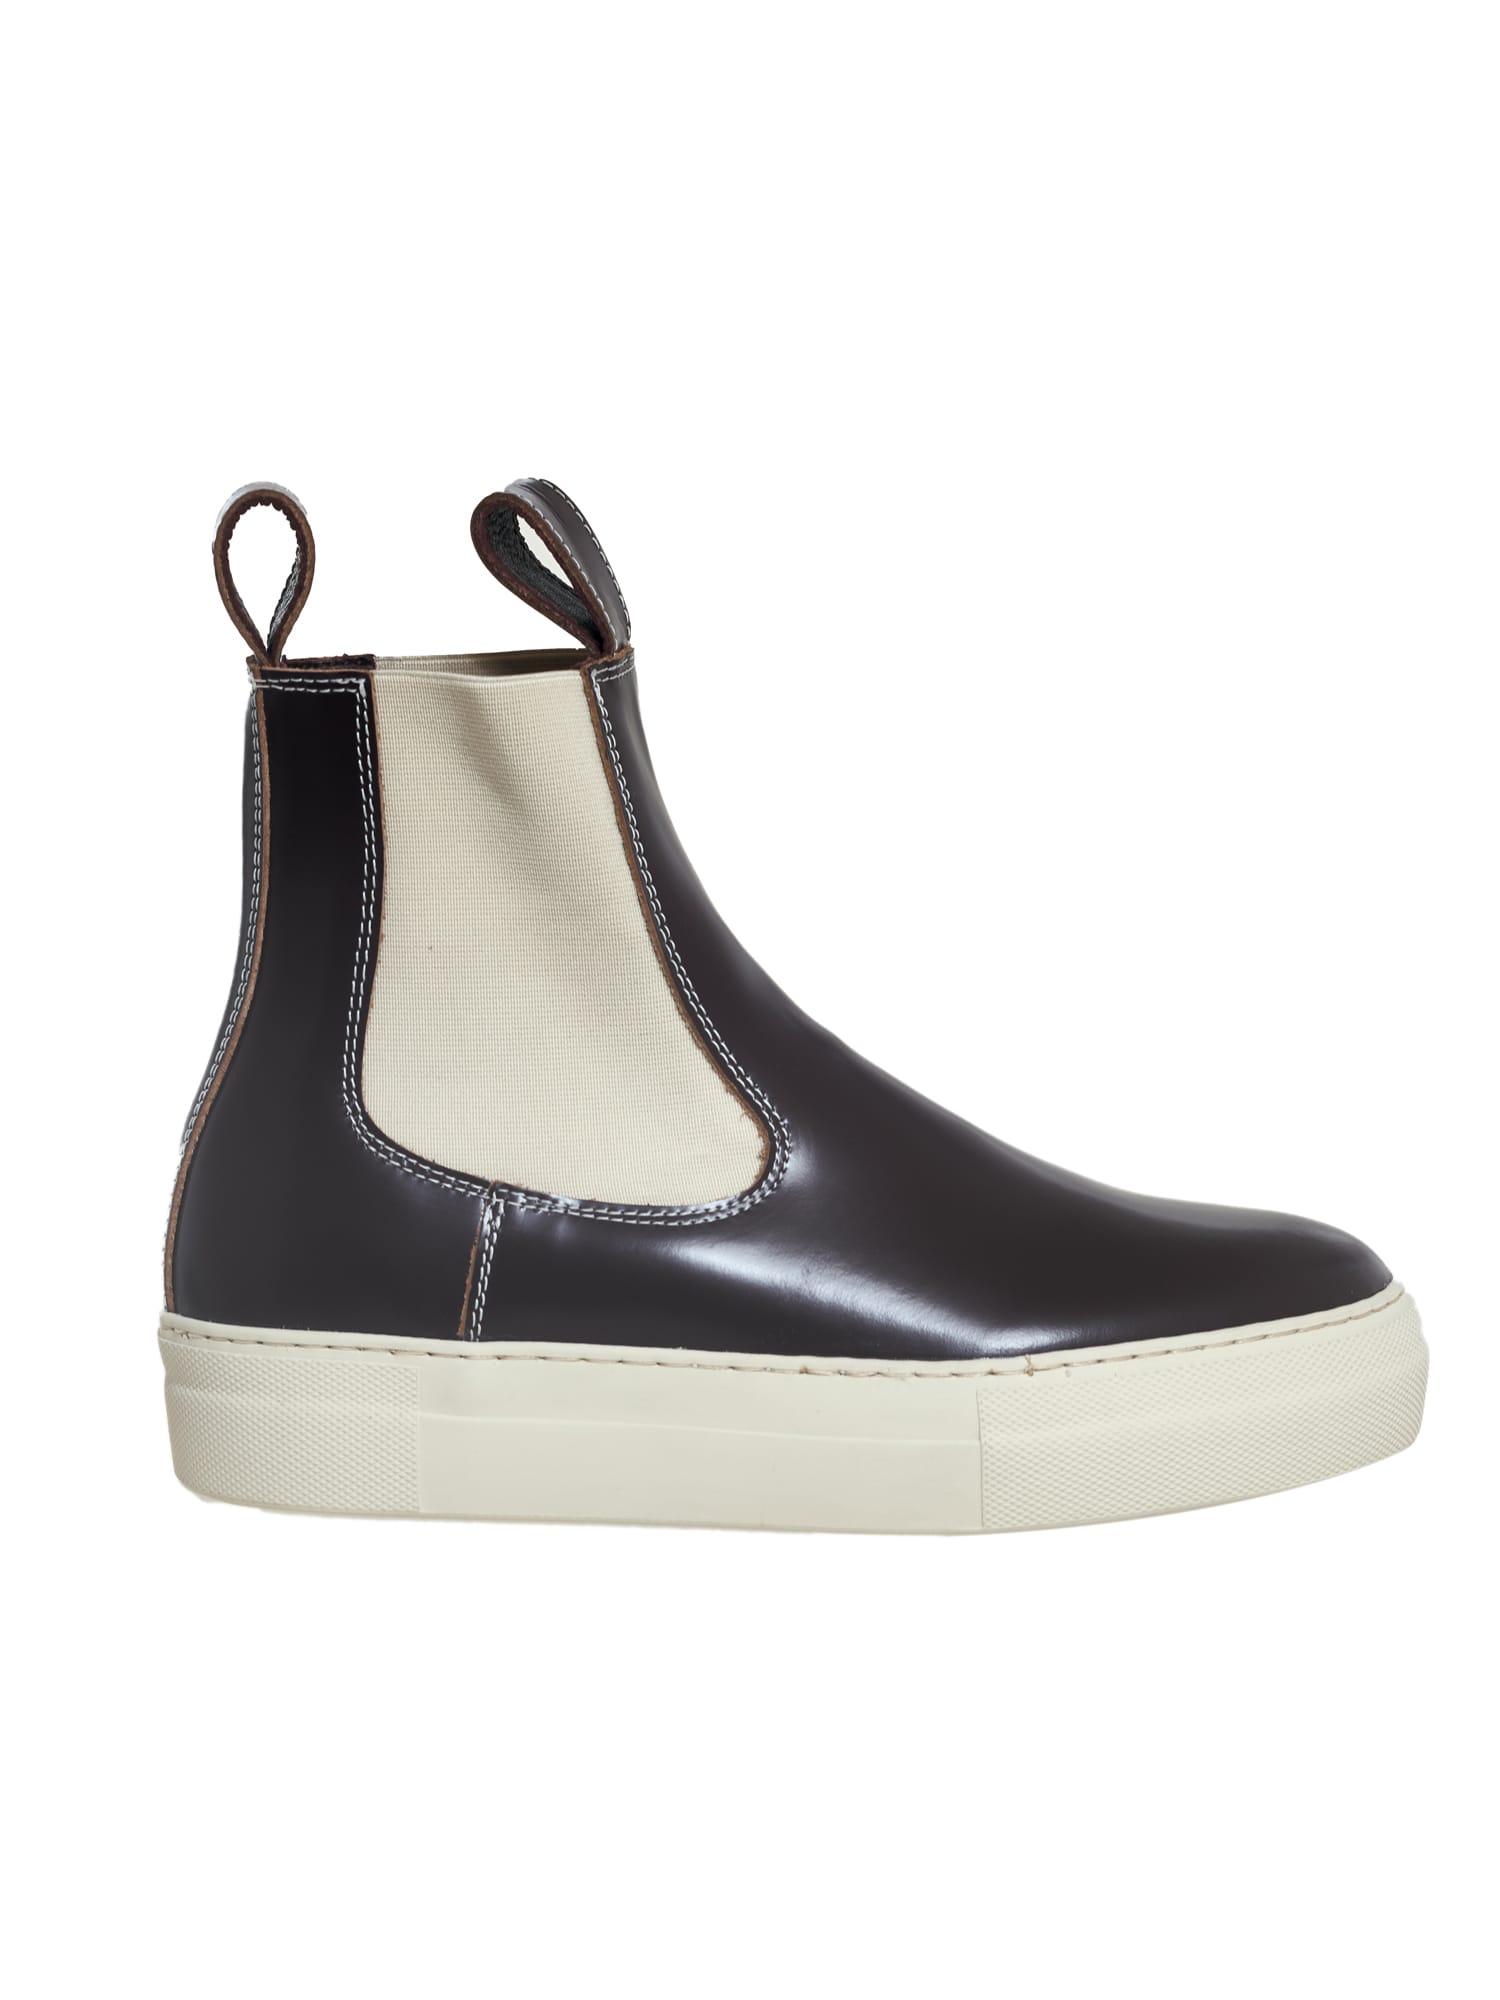 Sofie dHoore Boot